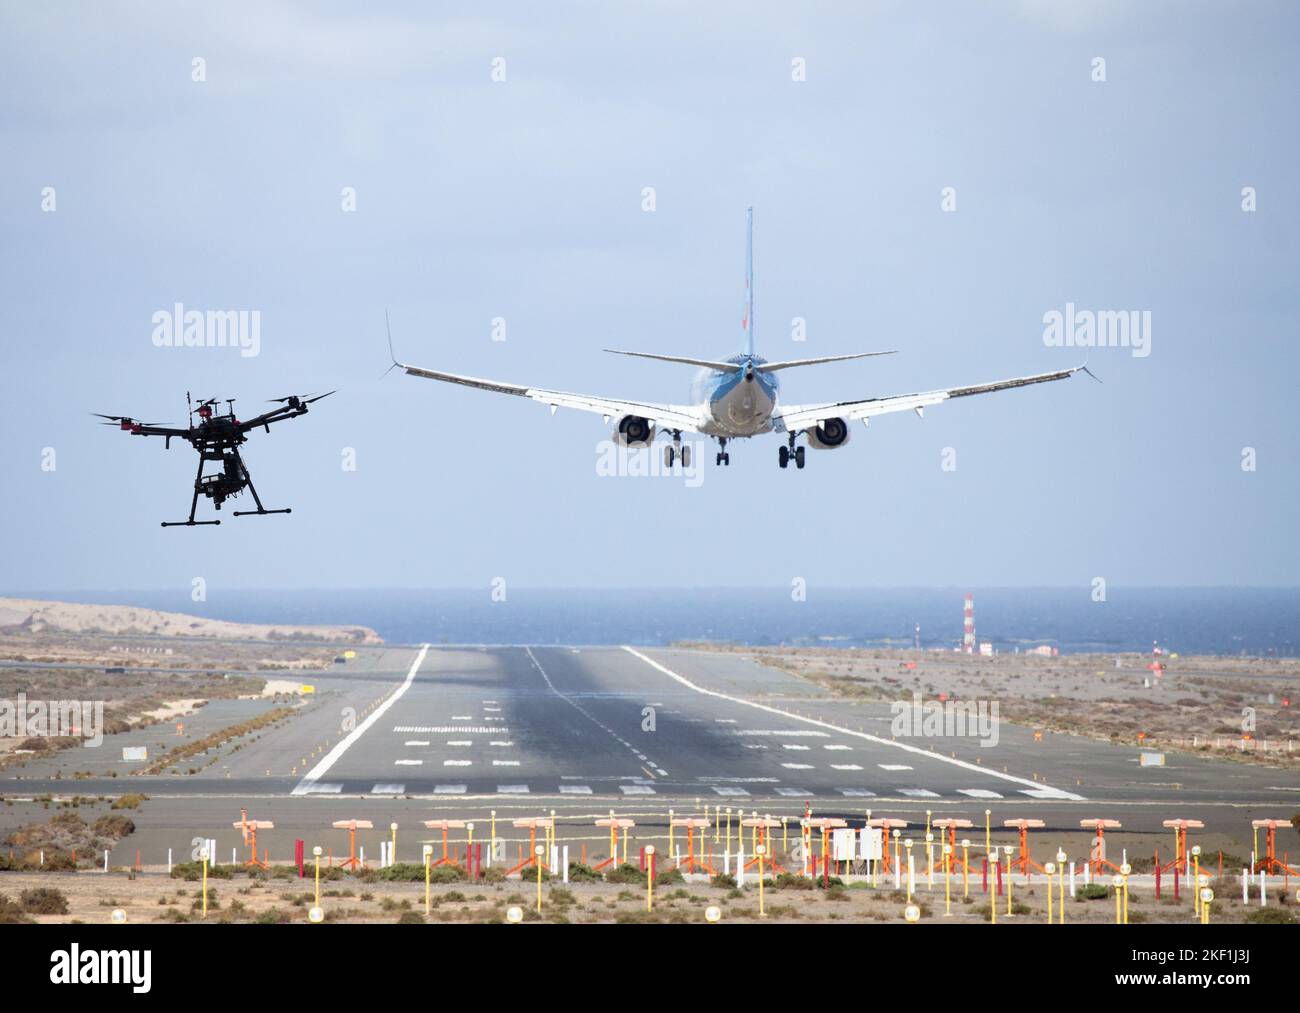 Drone near airport runway as aircraft, airplane lands. Stock Photo